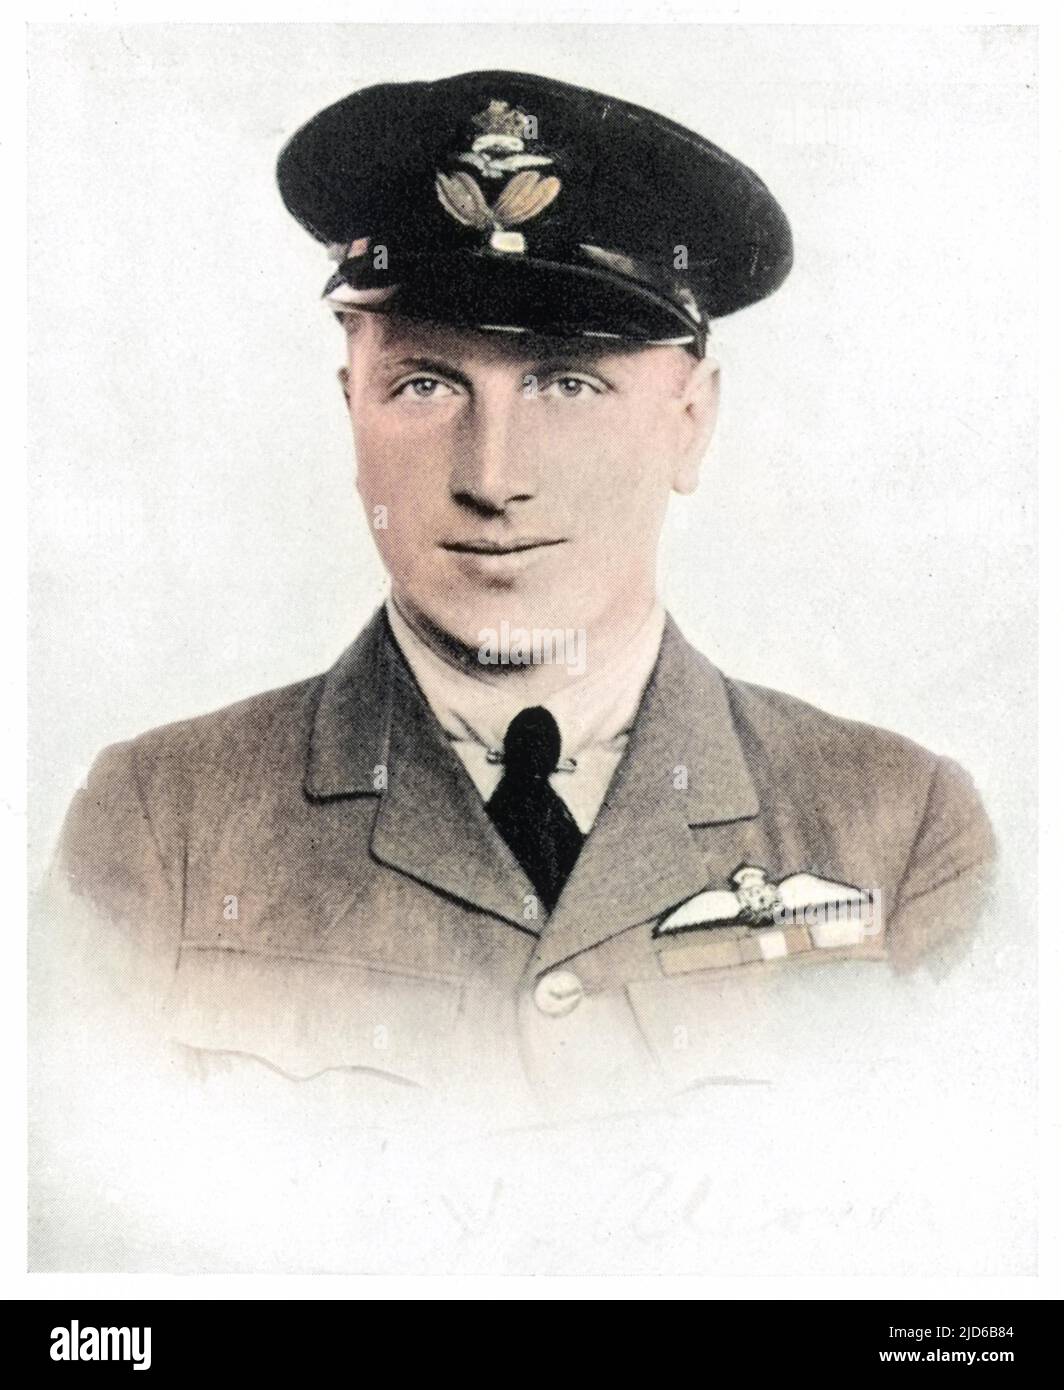 Captain in the Royal Air Force, he was the pilot of the first direct transatlantic flight in June 1919 with navigator Arthur Whitten Brown. Colourised version of : 10164932       Date: 1892 - 1919 Stock Photo